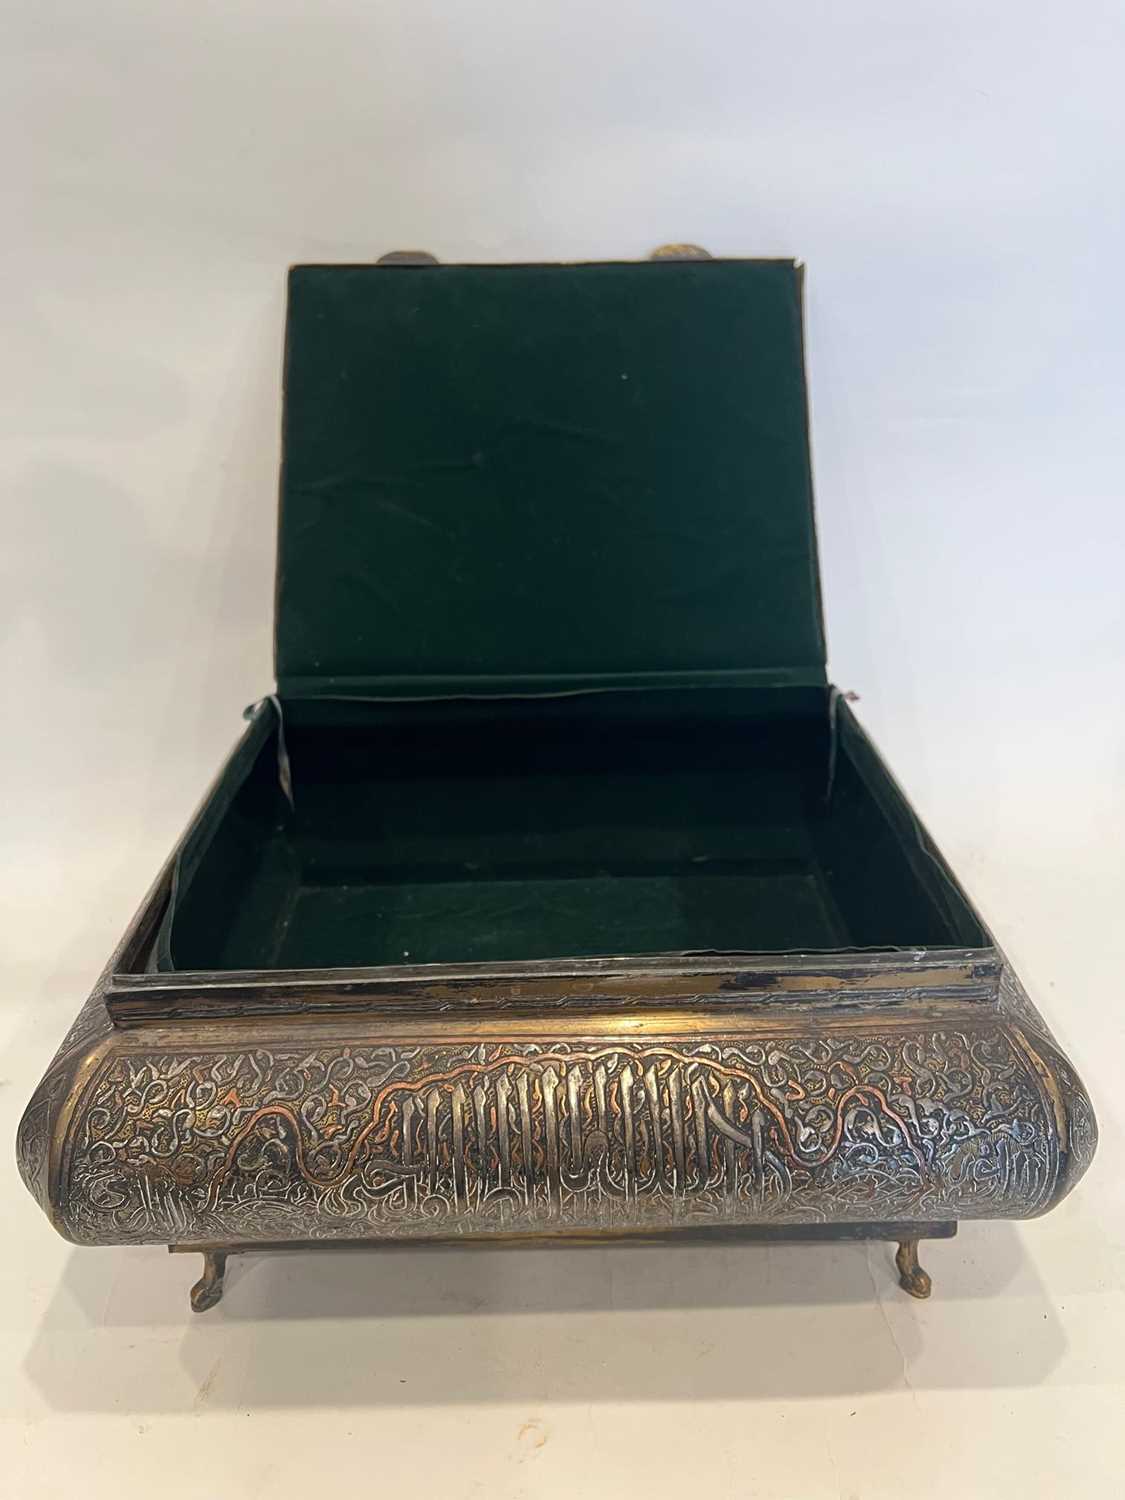 A LARGE EGYPTIAN MAMLUK REVIVAL SILVER AND COPPER INLAID BOX - Image 4 of 6